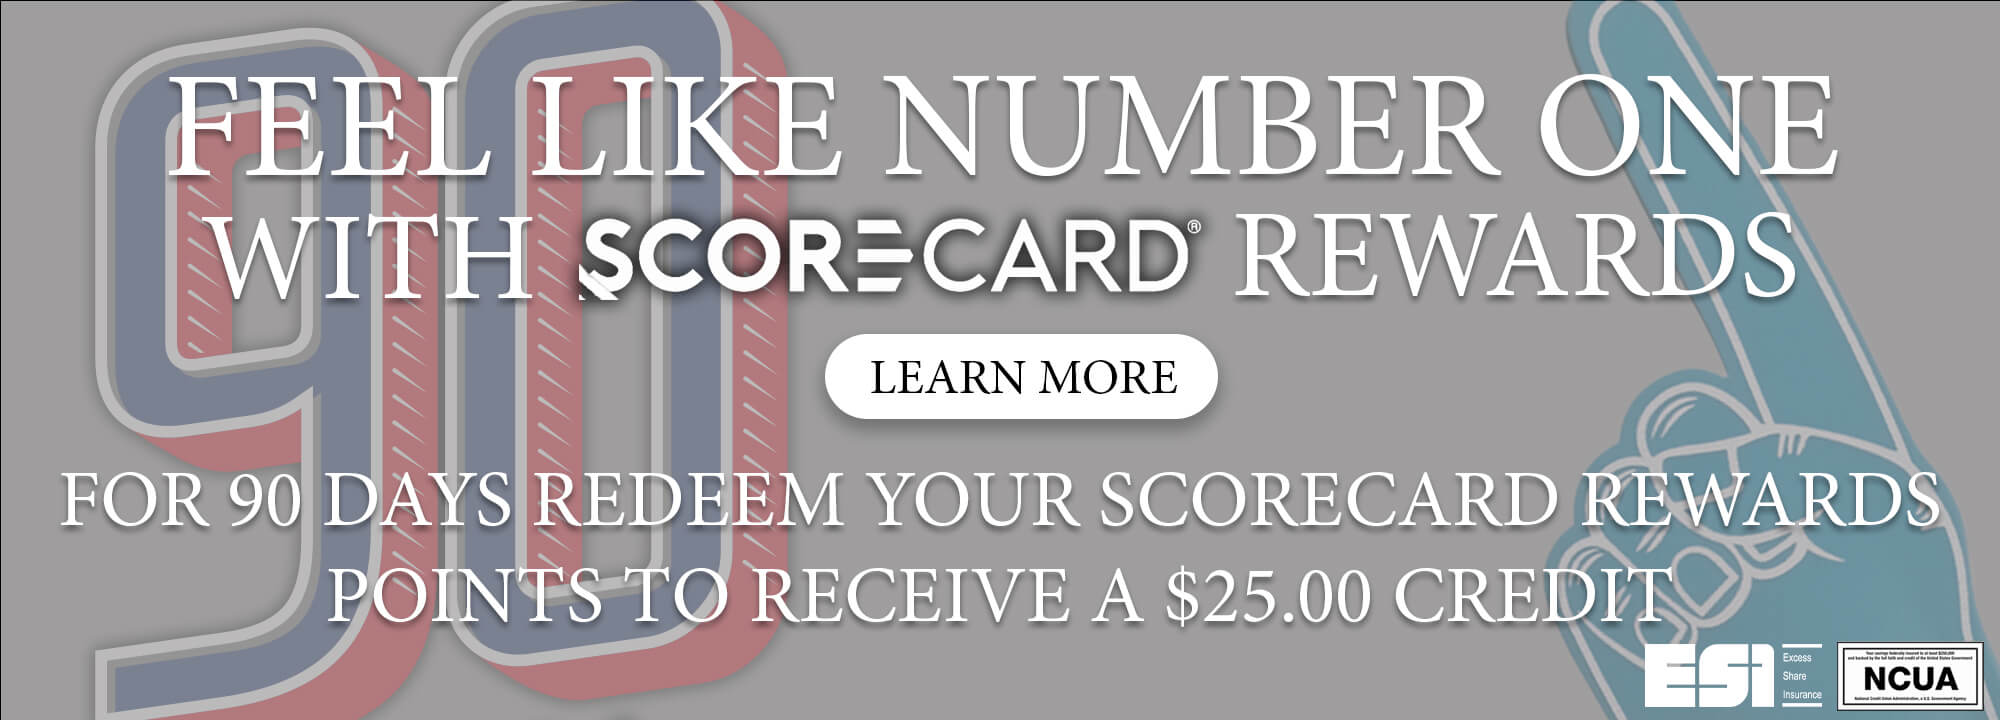 Feel like number one with scorecard rewards. Learn More. For 90 days redeem your scorecard rewards points to receive a $25 credit.